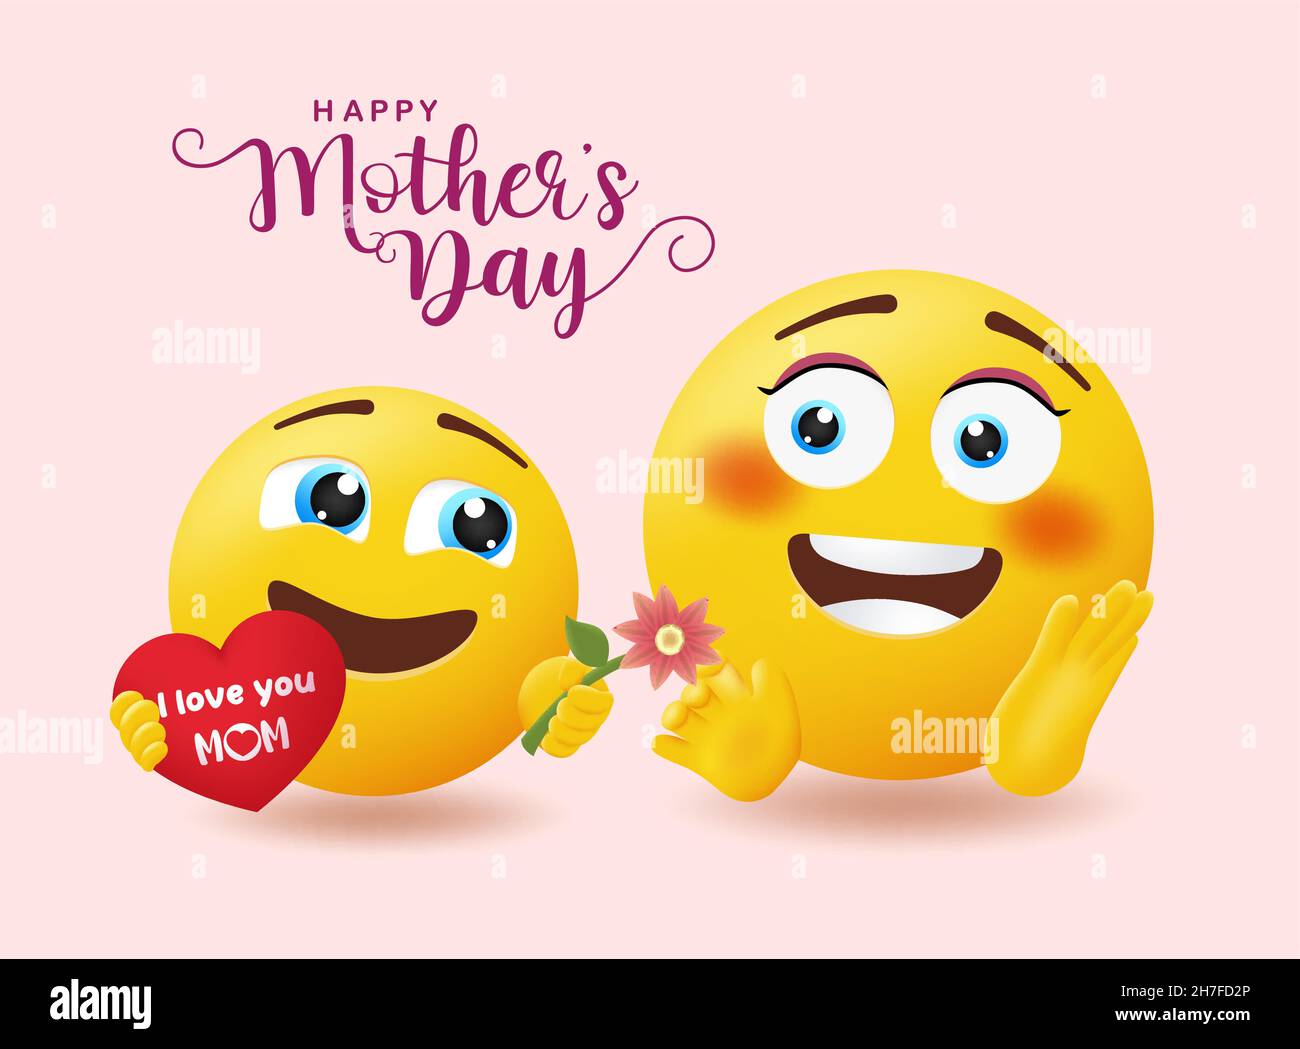 Smiley mother's day greeting vector design. Happy mothers day text with emoticon child giving flower gift for mom's day emoji celebration present. Stock Vector